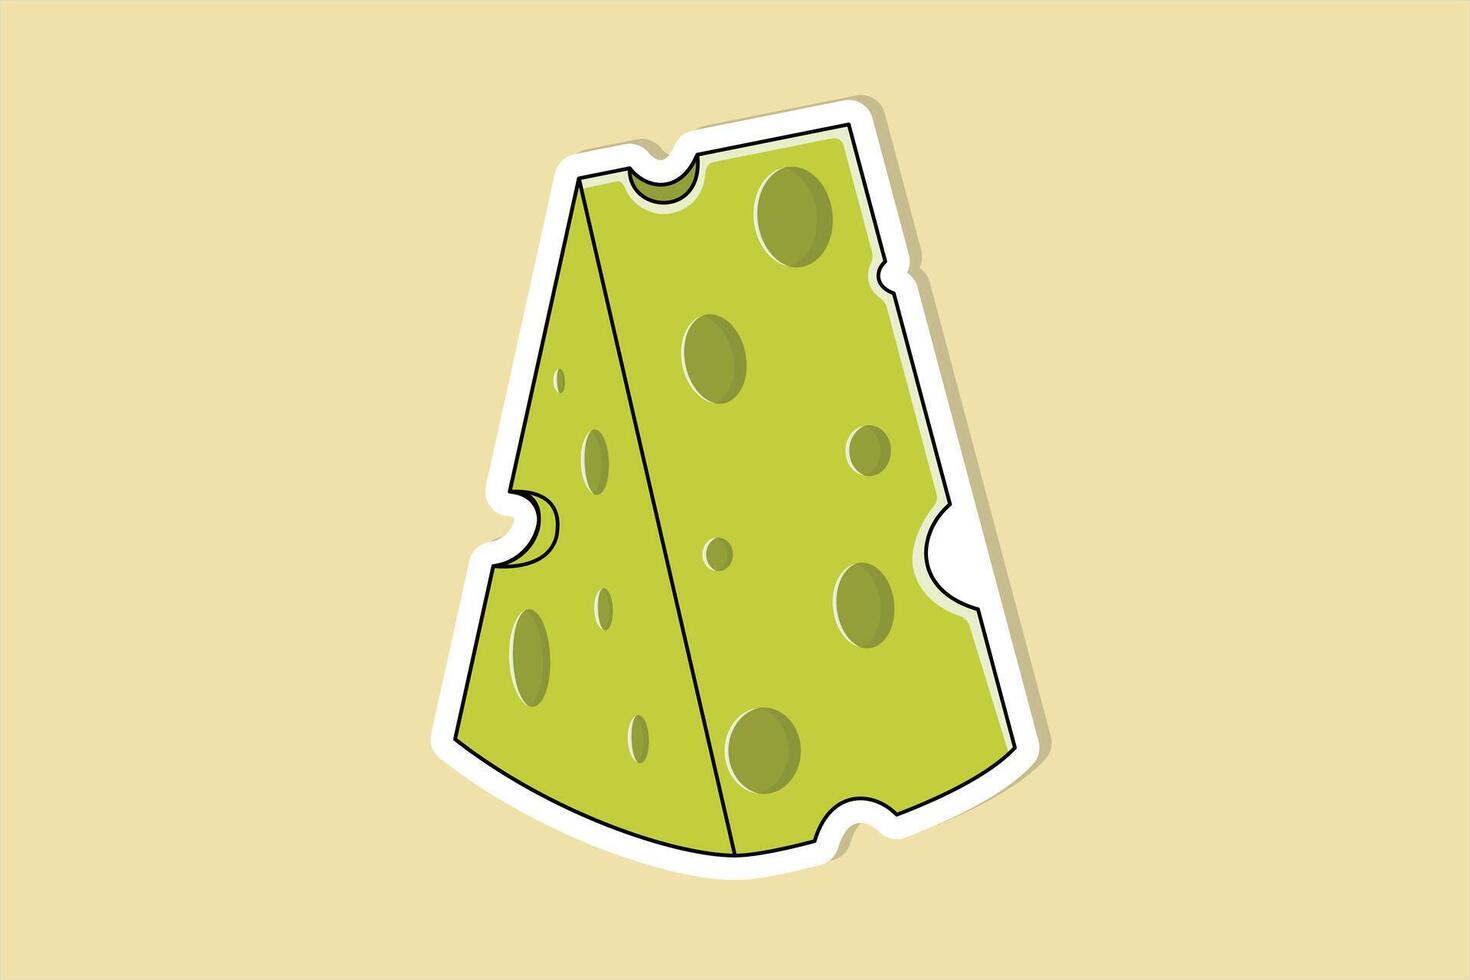 Cheese Cartoon Sticker design vector illustration. Food objects icon concept. Triangle shape cheese sticker design logo icon.